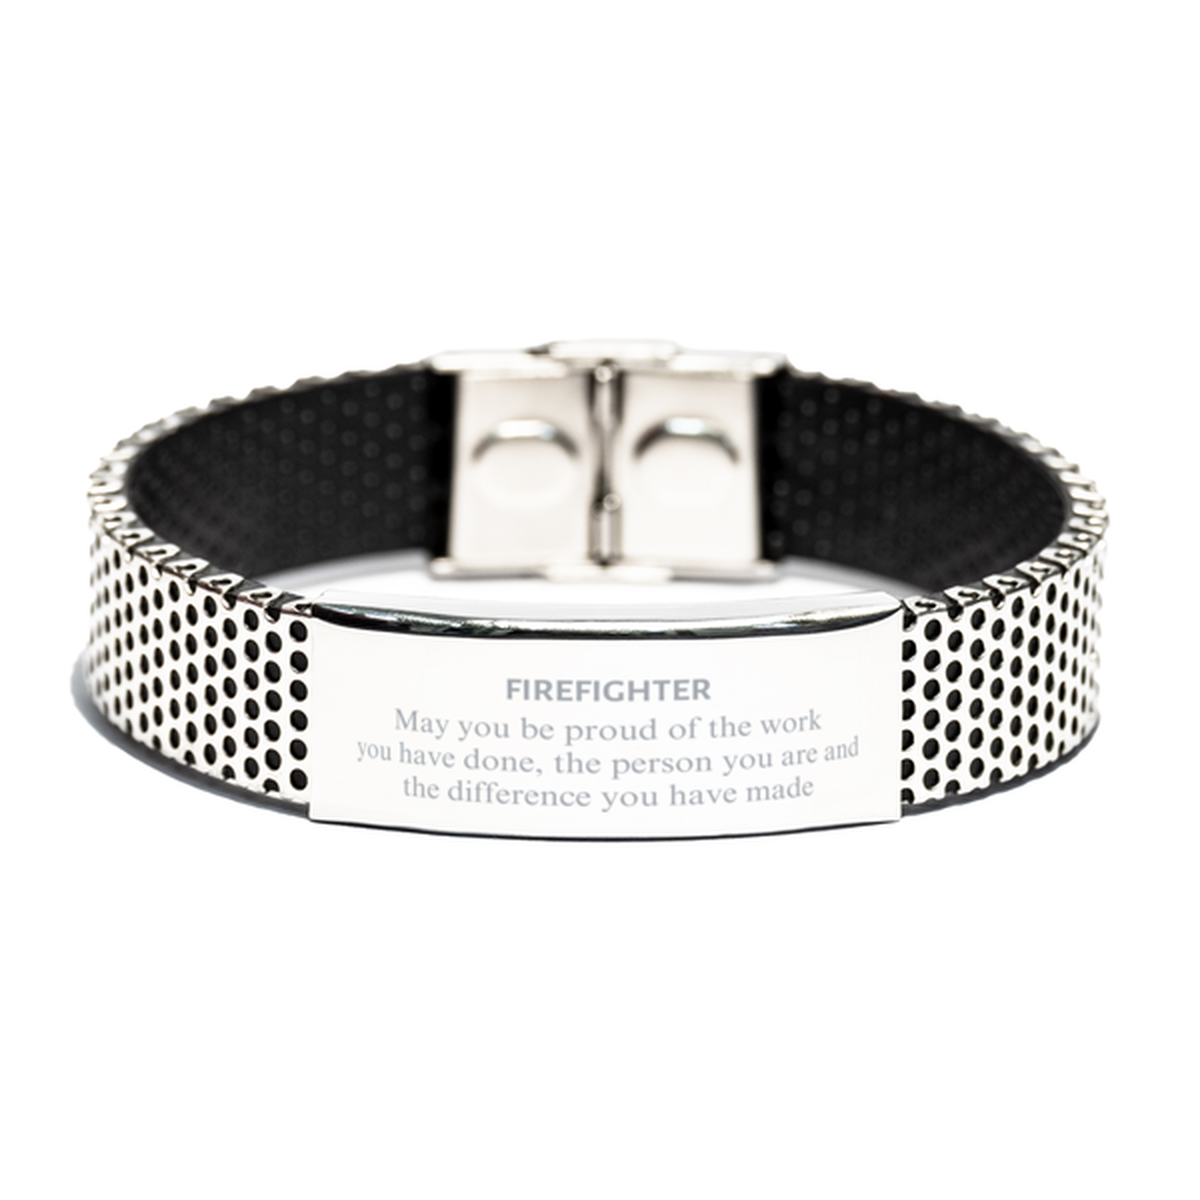 Firefighter May you be proud of the work you have done, Retirement Firefighter Stainless Steel Bracelet for Colleague Appreciation Gifts Amazing for Firefighter